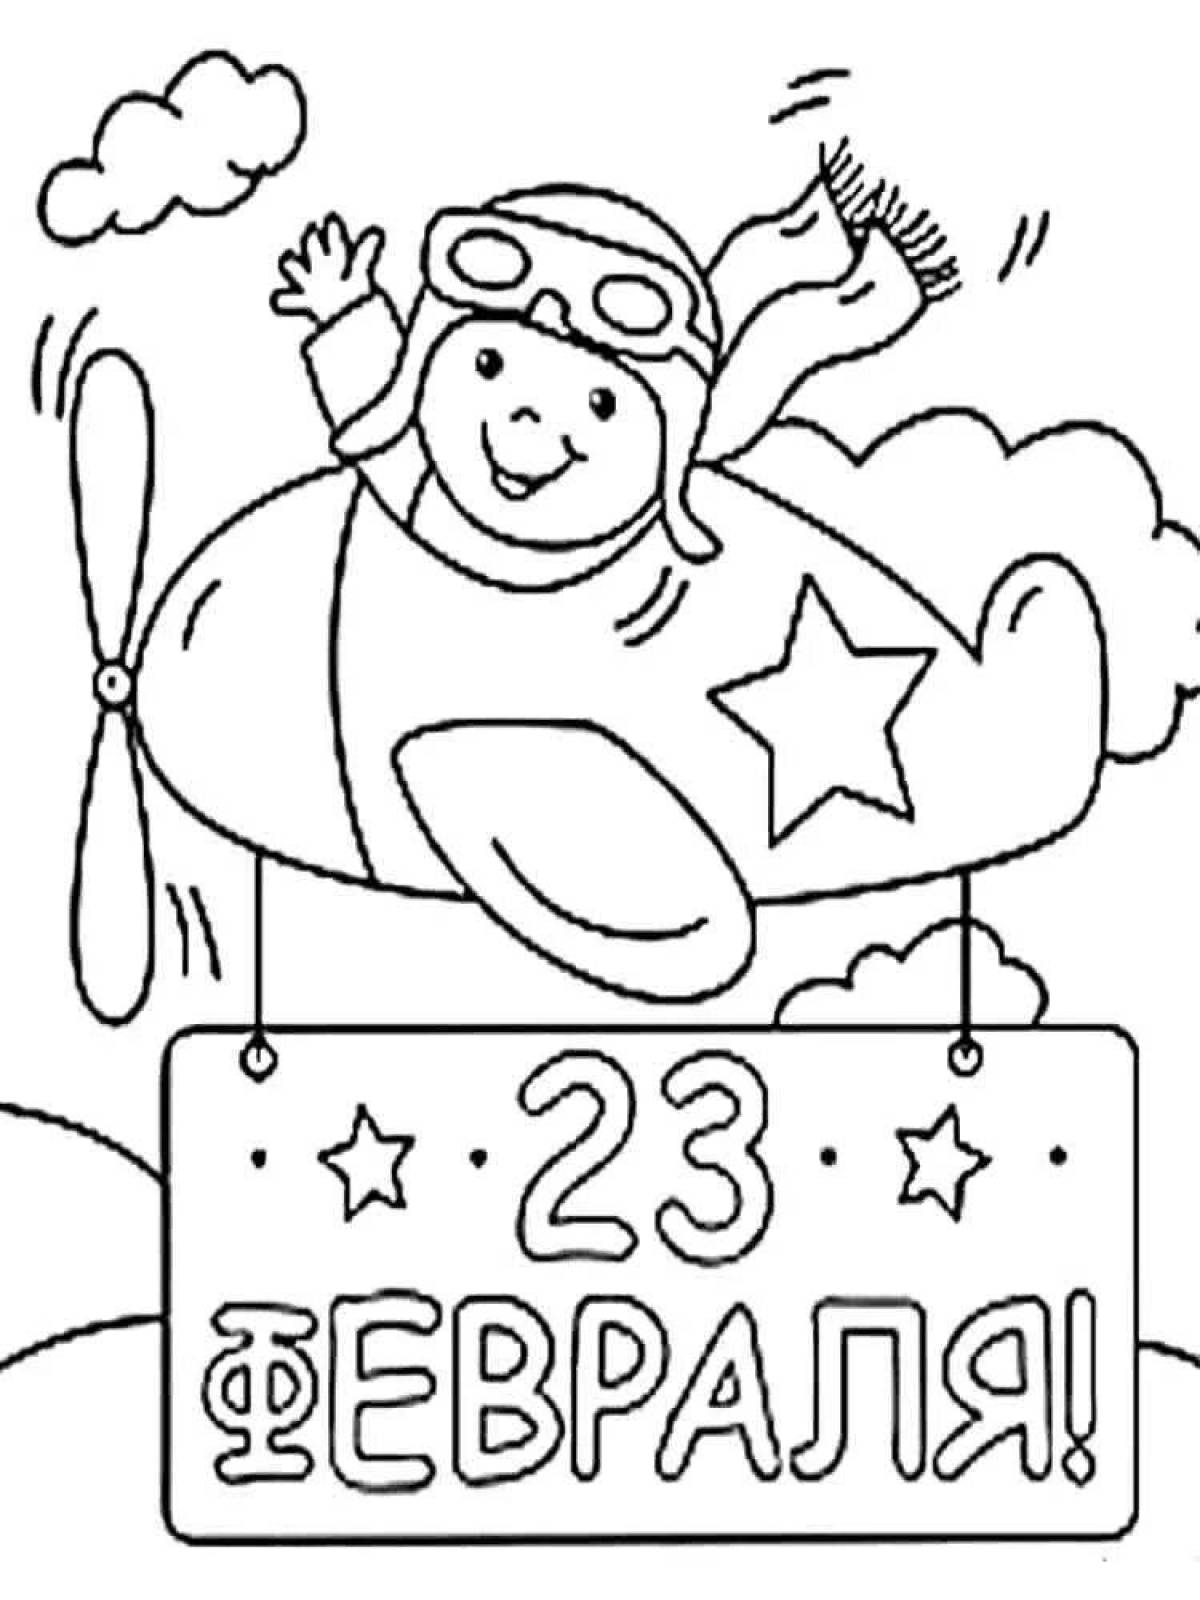 February 2 coloring book